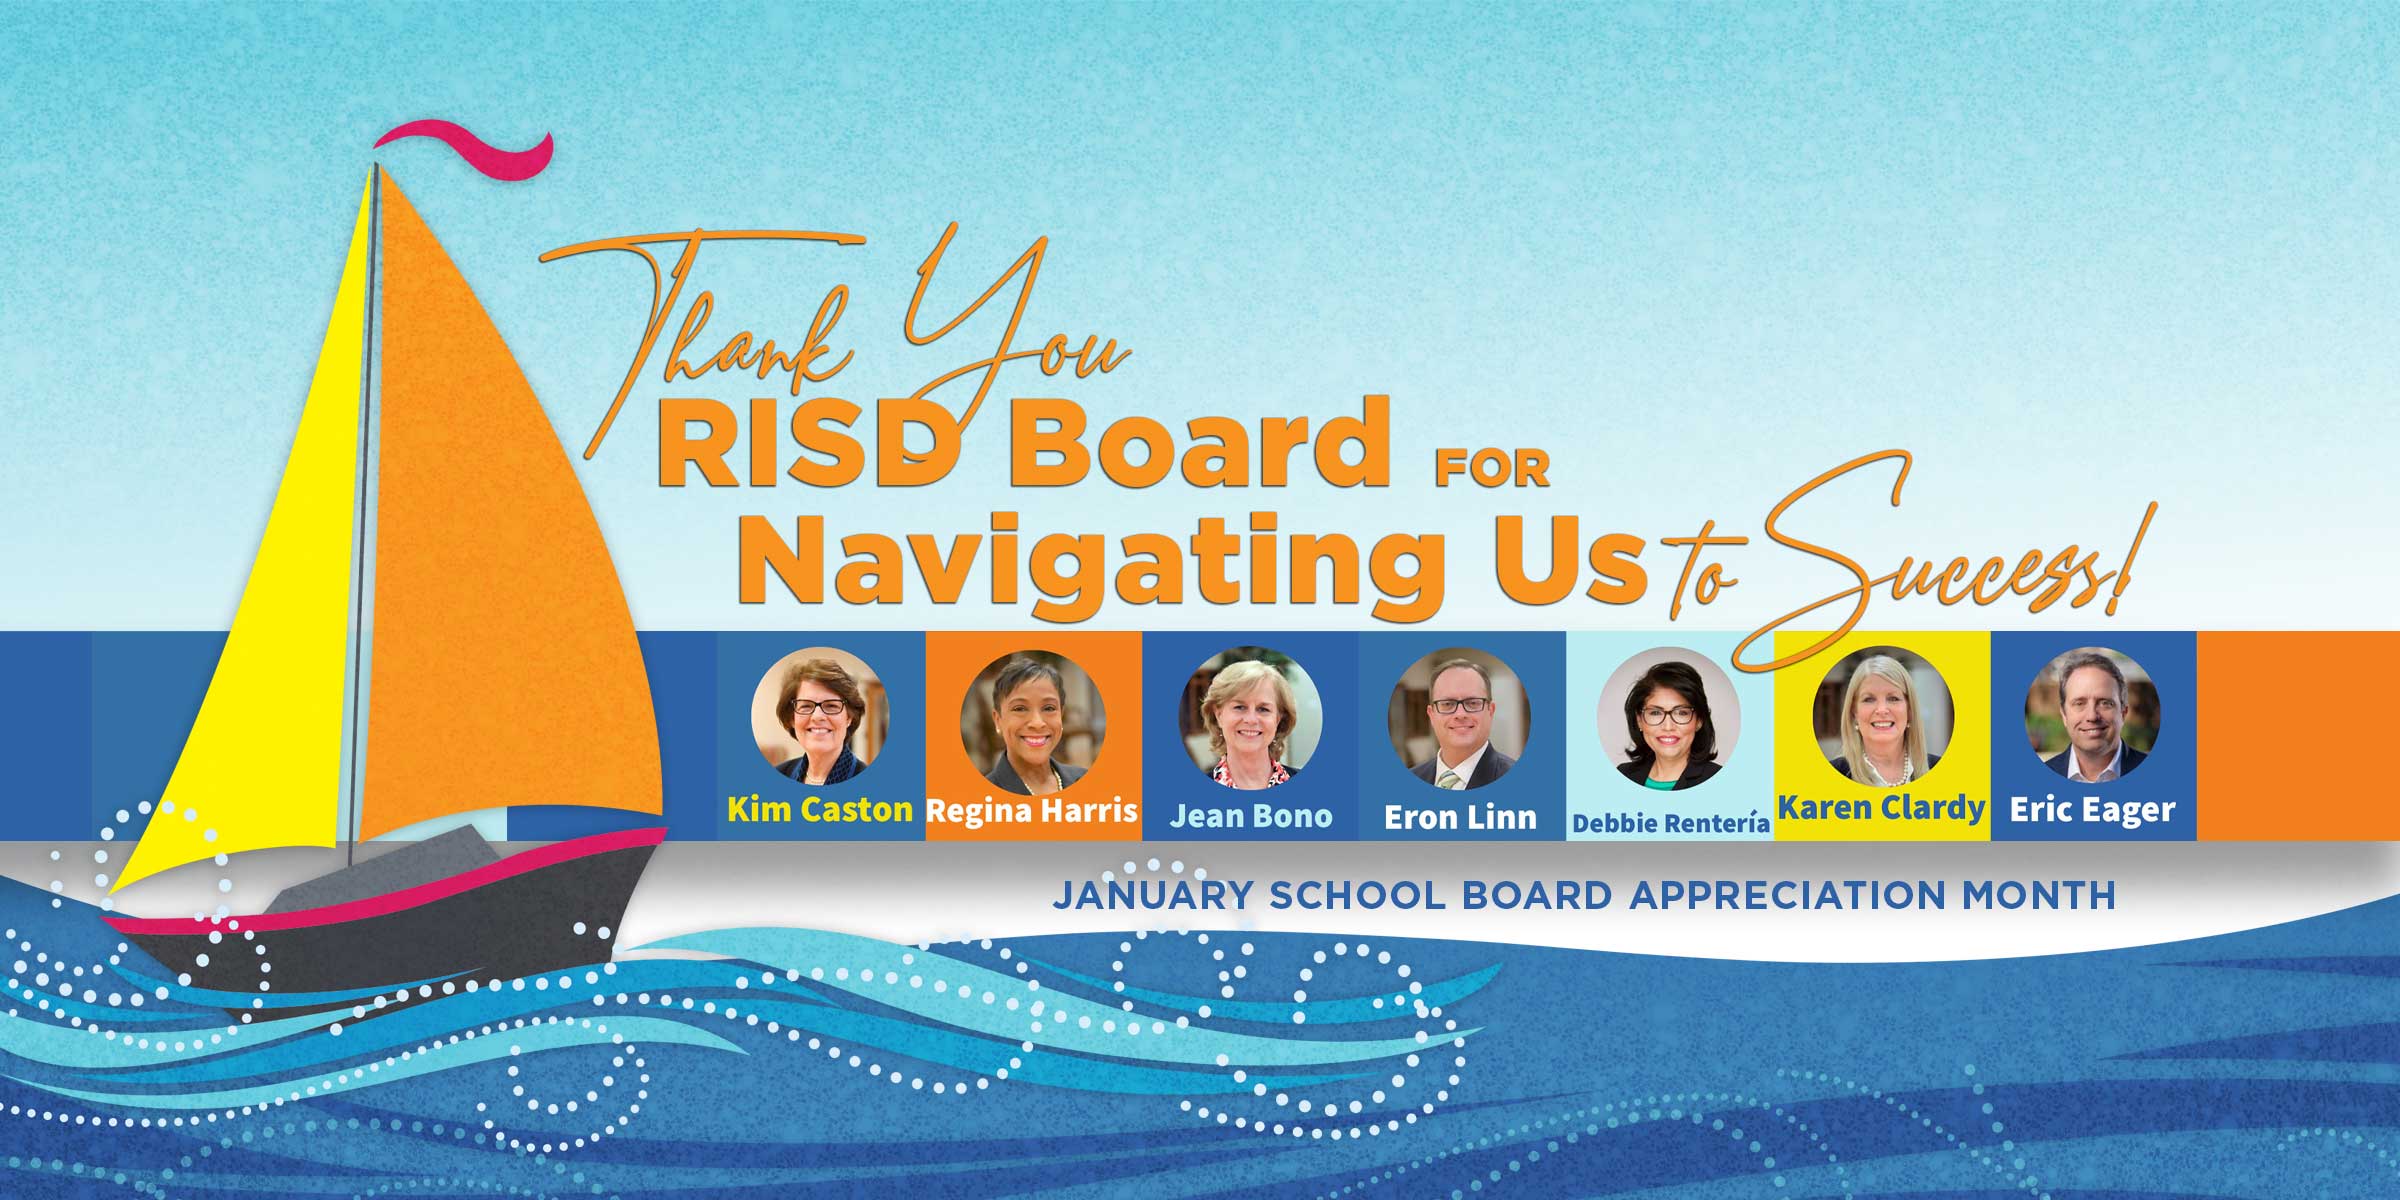 Thank you RISD board to navigating us to success, January school board appreciation month